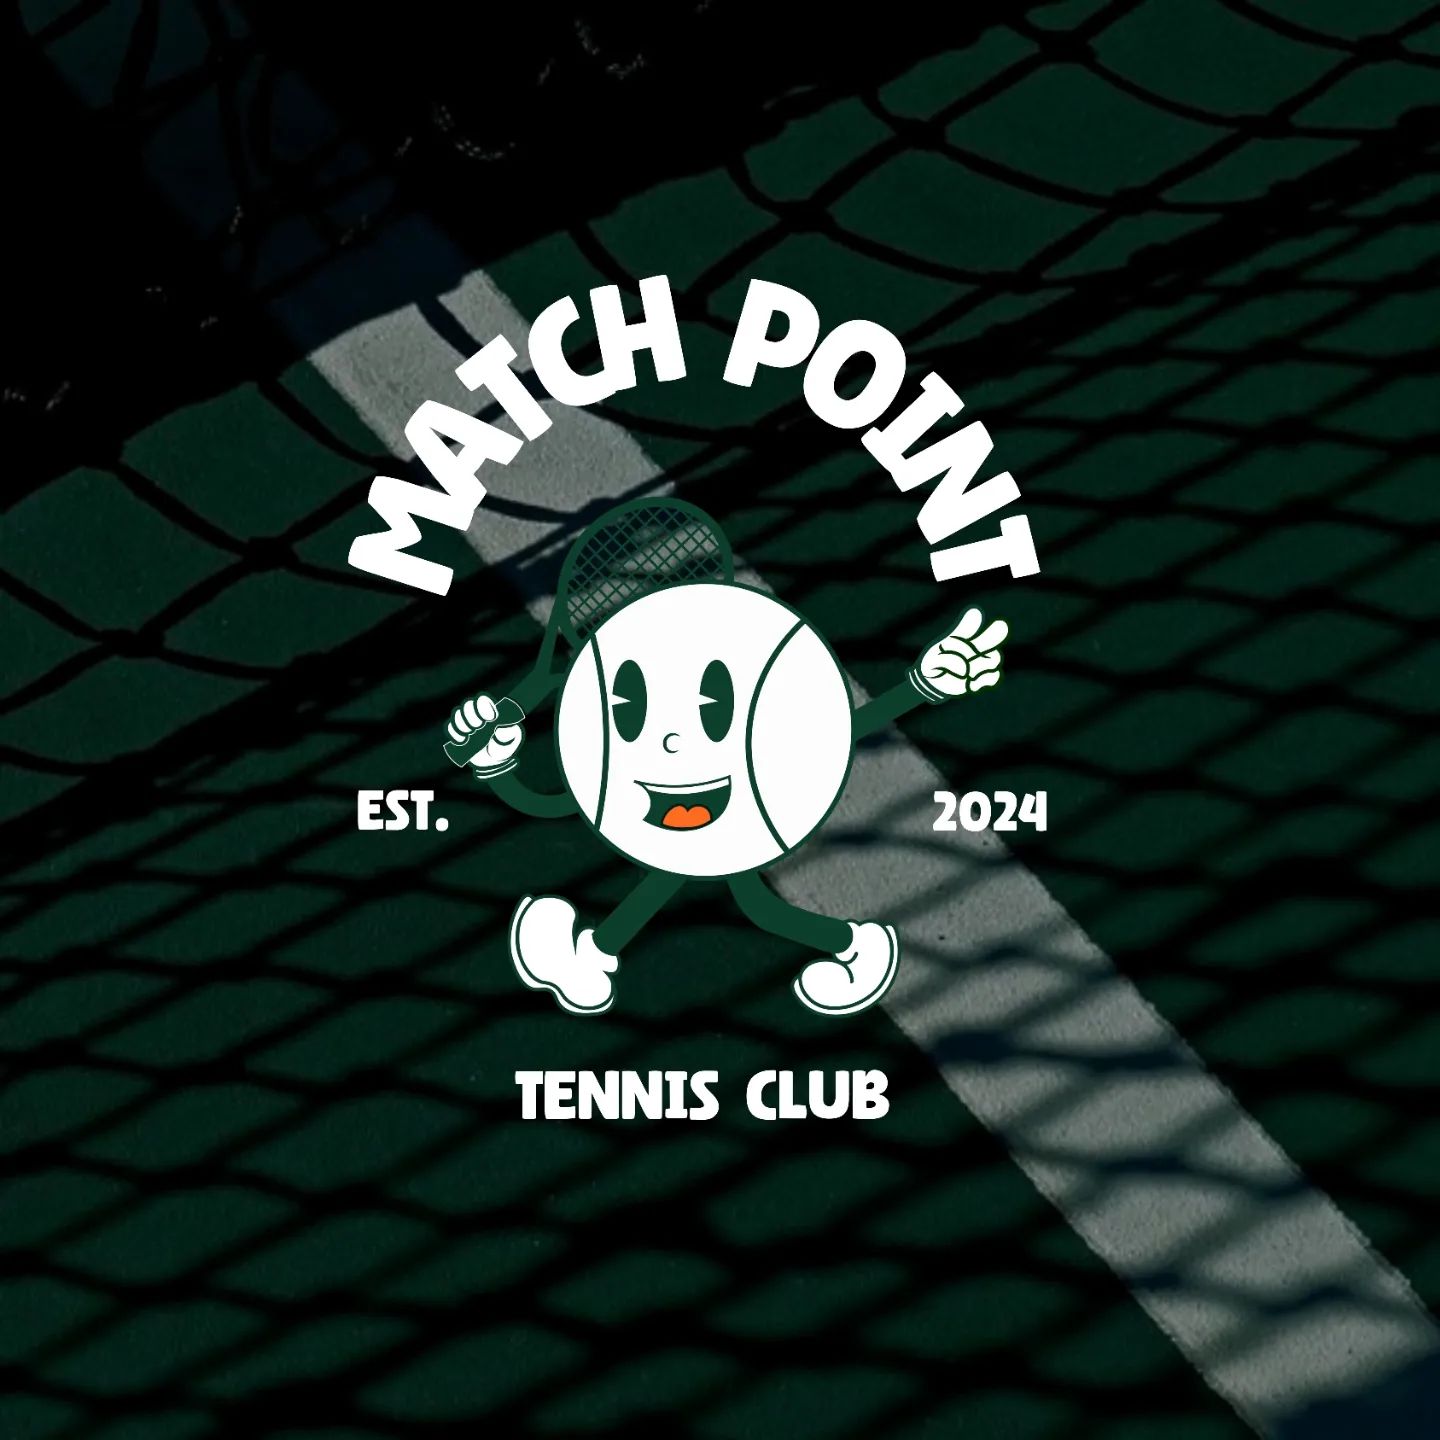 Match Point—Brand Identity

A tennis club in the heart of Edinburgh. Fostering a dynamic, inclusive environment that res